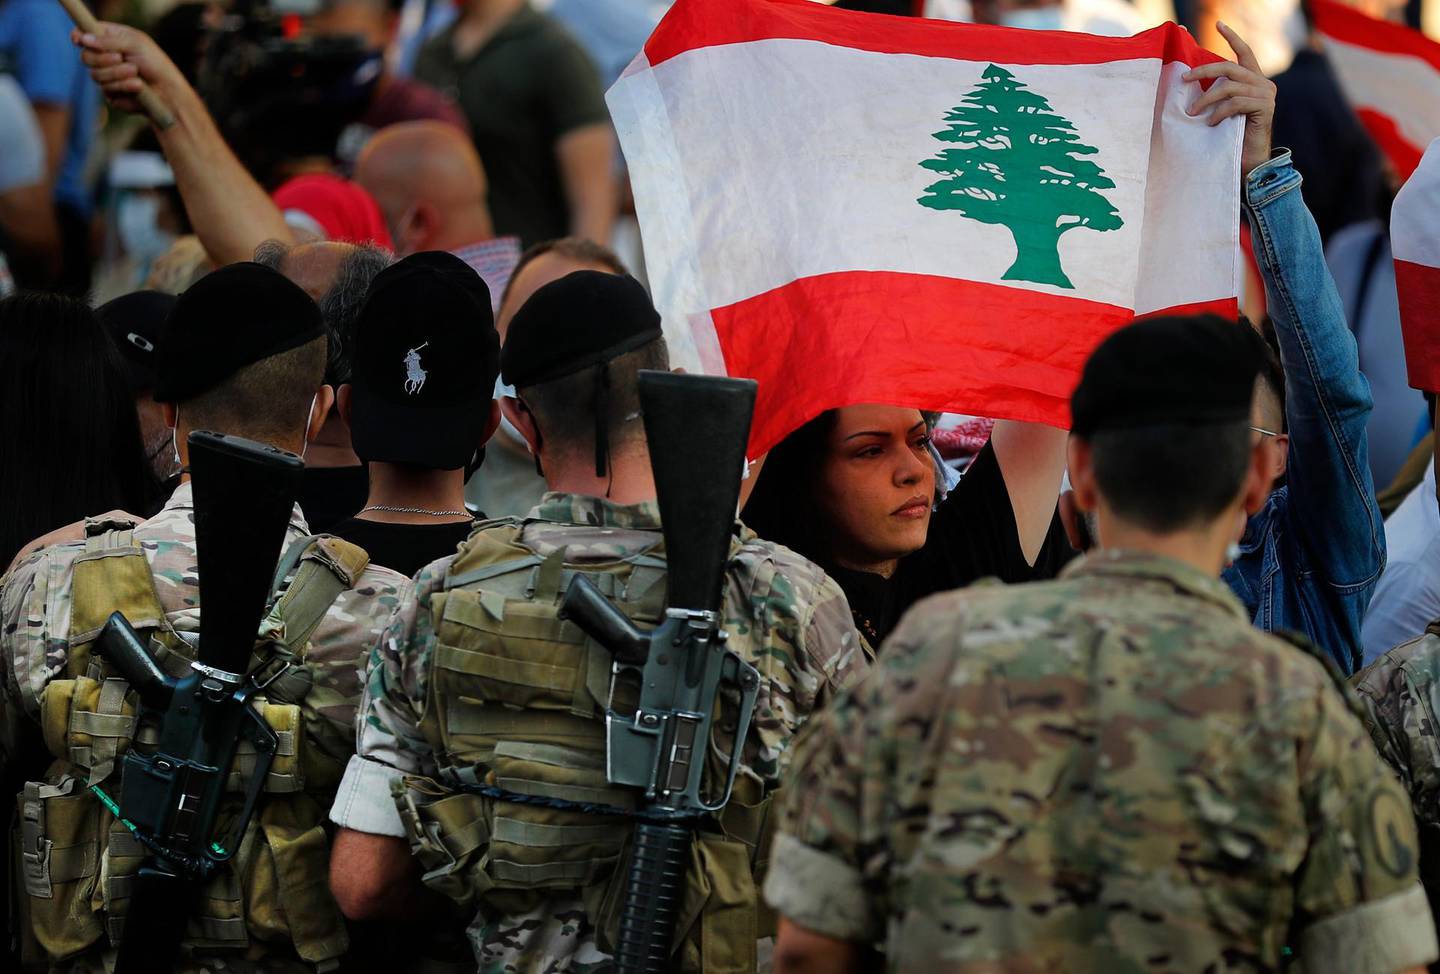 An anti-government protester holds a national flag, as she passes in front of Lebanese army soldiers during a protest against rising prices and worsening economic and financial conditions, in Zalka, north of Beirut, Lebanon, Monday, Oct. 5, 2020. Lebanon is passing through its worst economic and financial crisis in decades made worse by the coronavirus pandemic. (AP Photo/Hussein Malla)